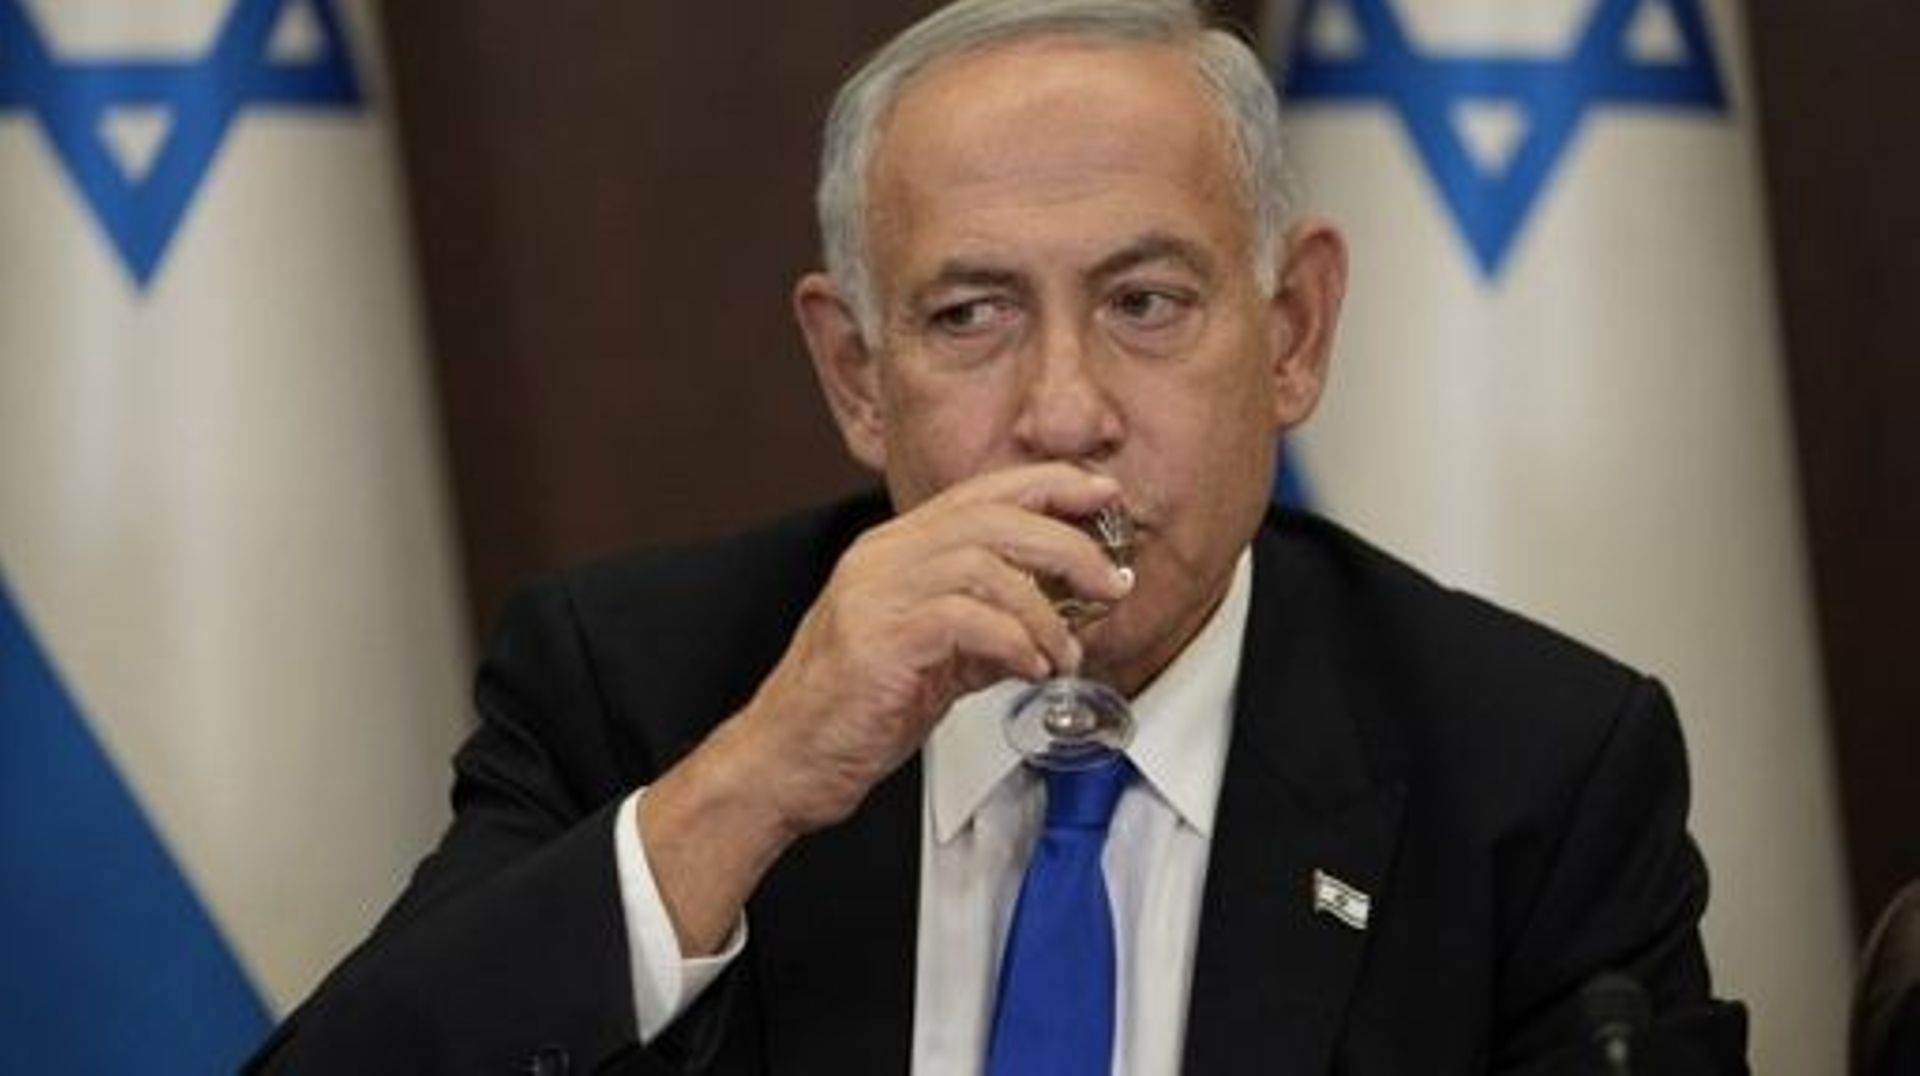 Newly sworn-in Israeli Prime Minister Benjamin Netanyahu toasts with a drink during the first cabinet meeting of his new government in Jerusalem, on December 29, 2022. Netanyahu was sworn in as prime minister after a stint in opposition, heading what anal